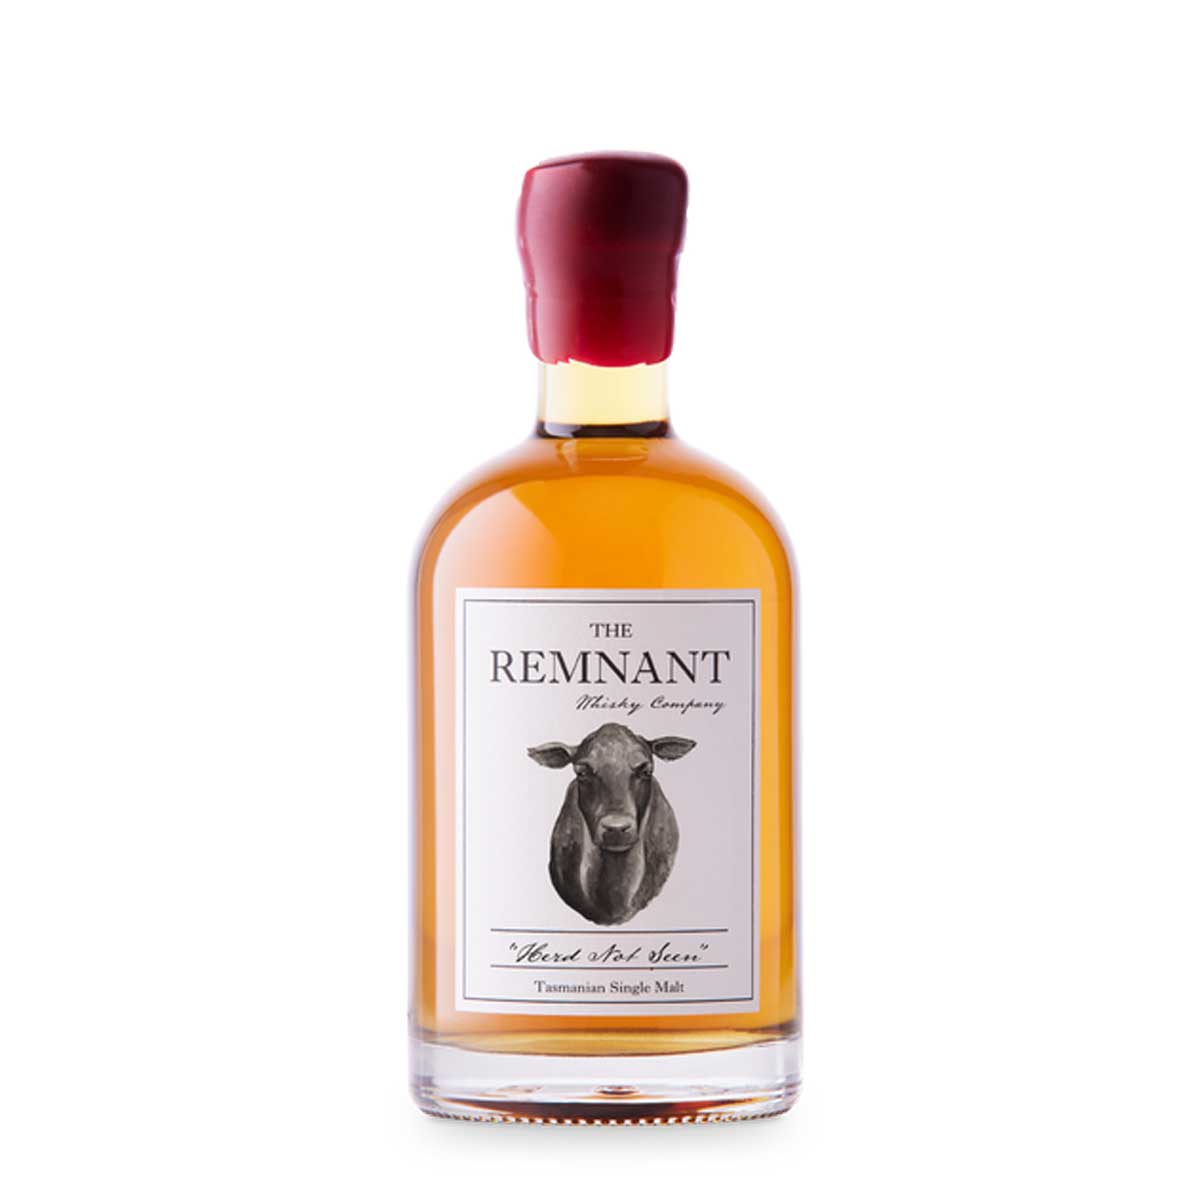 TAG Liquor Stores BC - The Remnant "Fly by night" Tasmanian Whisky 700ml